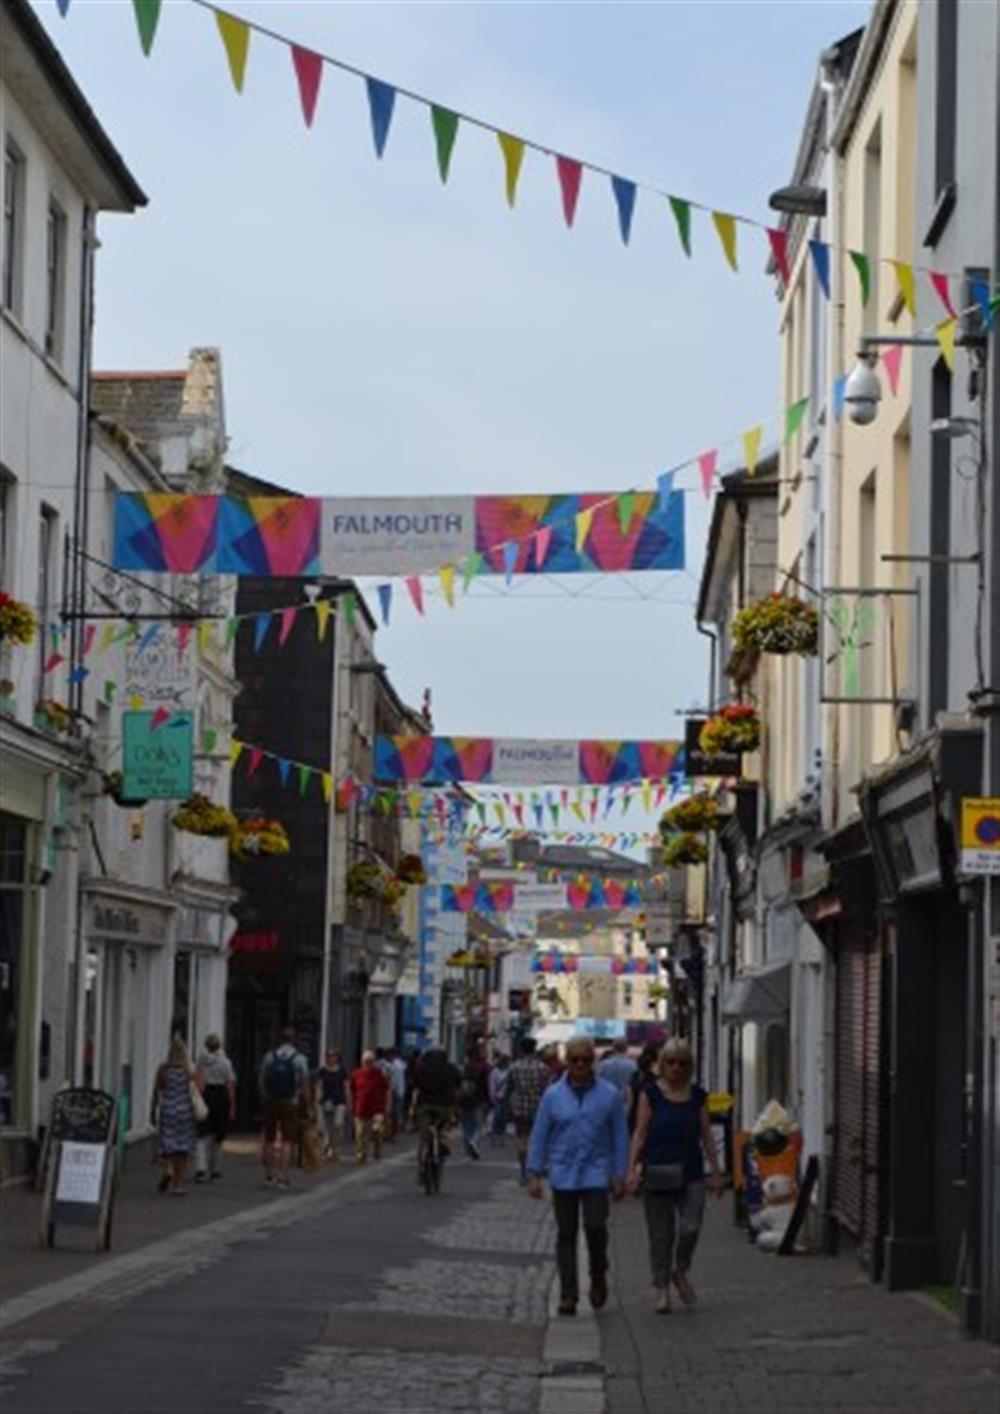 Falmouth town has an array of shops, plus a range of restaurants, cafes and art galleries. at Hove To in Helford Passage